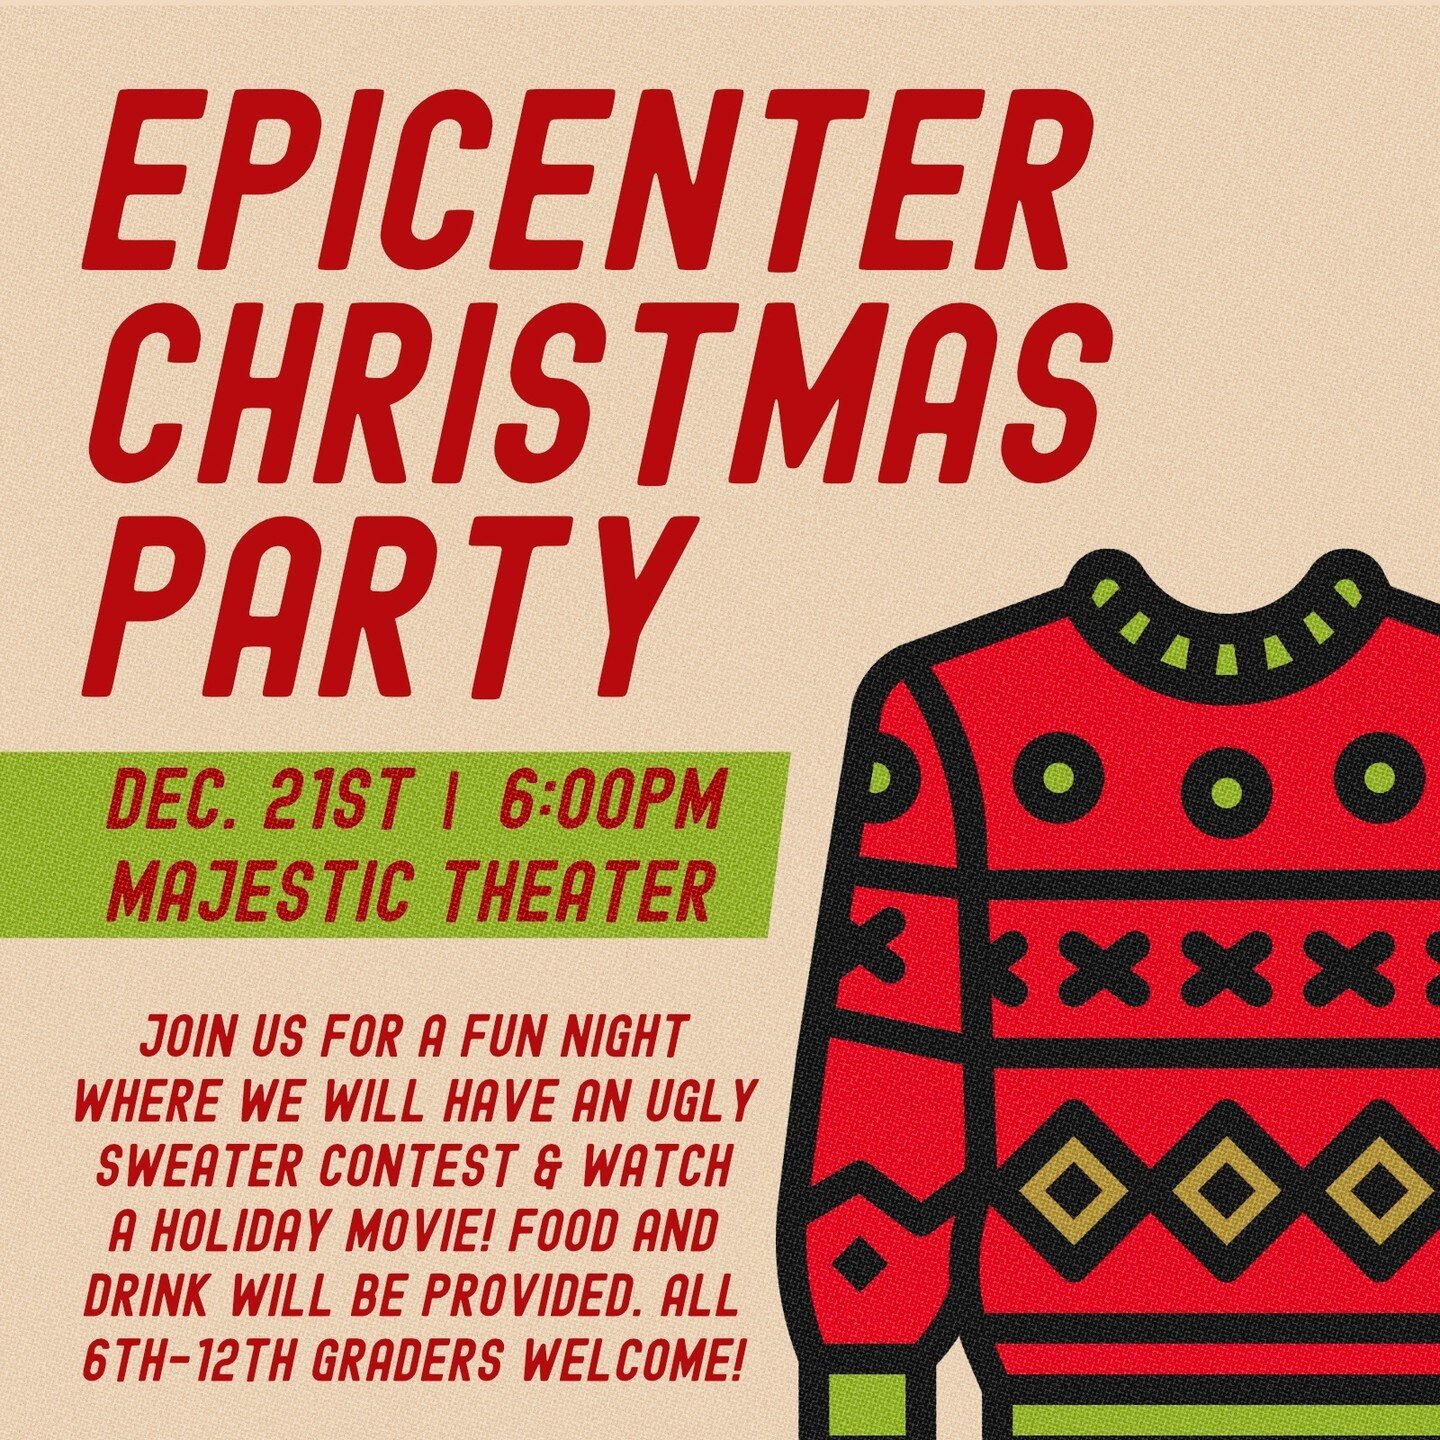 Calling all 5th-12th graders!!! We are having an Epicenter Christmas Party December 21st 6:00pm at the Majestic Theater! Wear your best ugly sweater and join us as we watch a holiday movie! We hope to see you there!